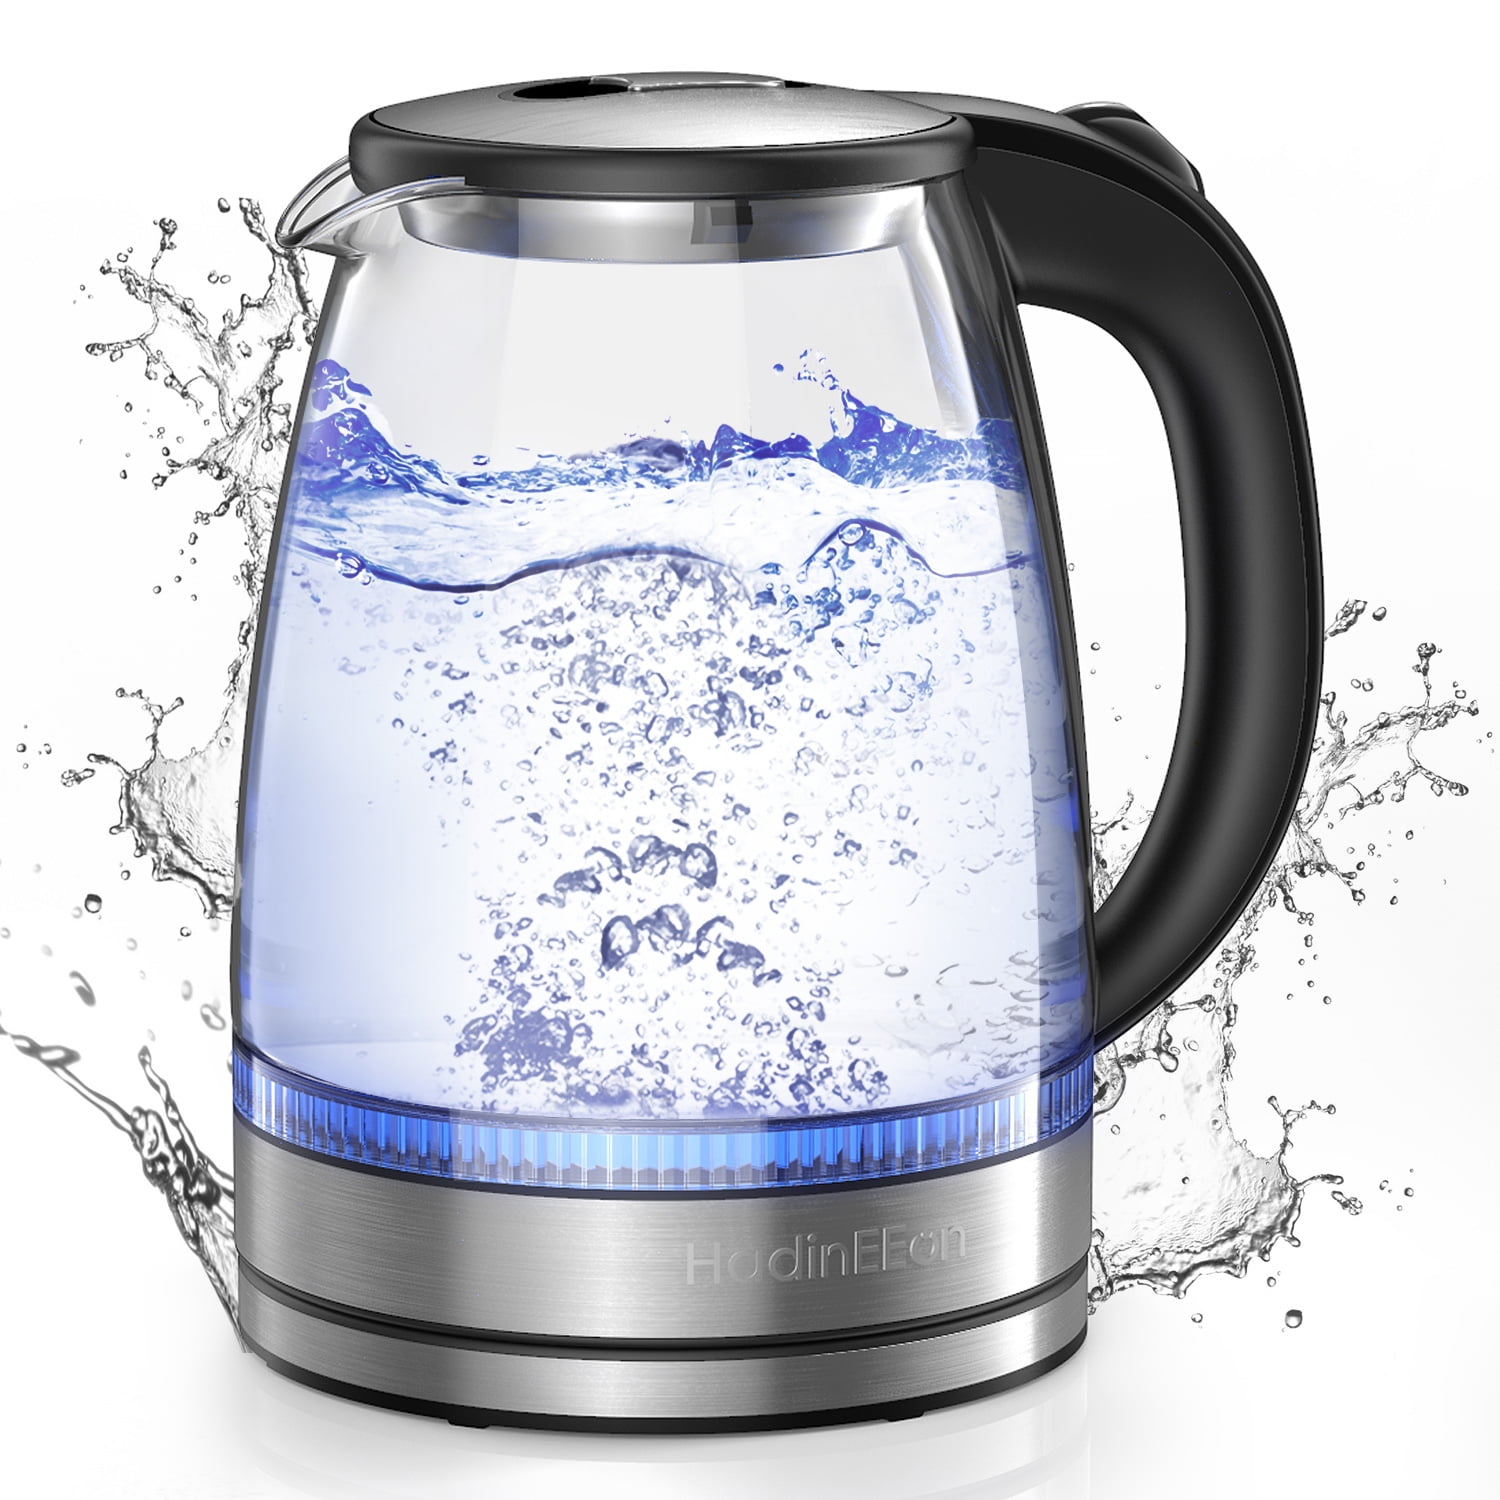 Hot Water Boil Blue LED Keep Warm Stainless Steel Cordless New Electric Kettle 